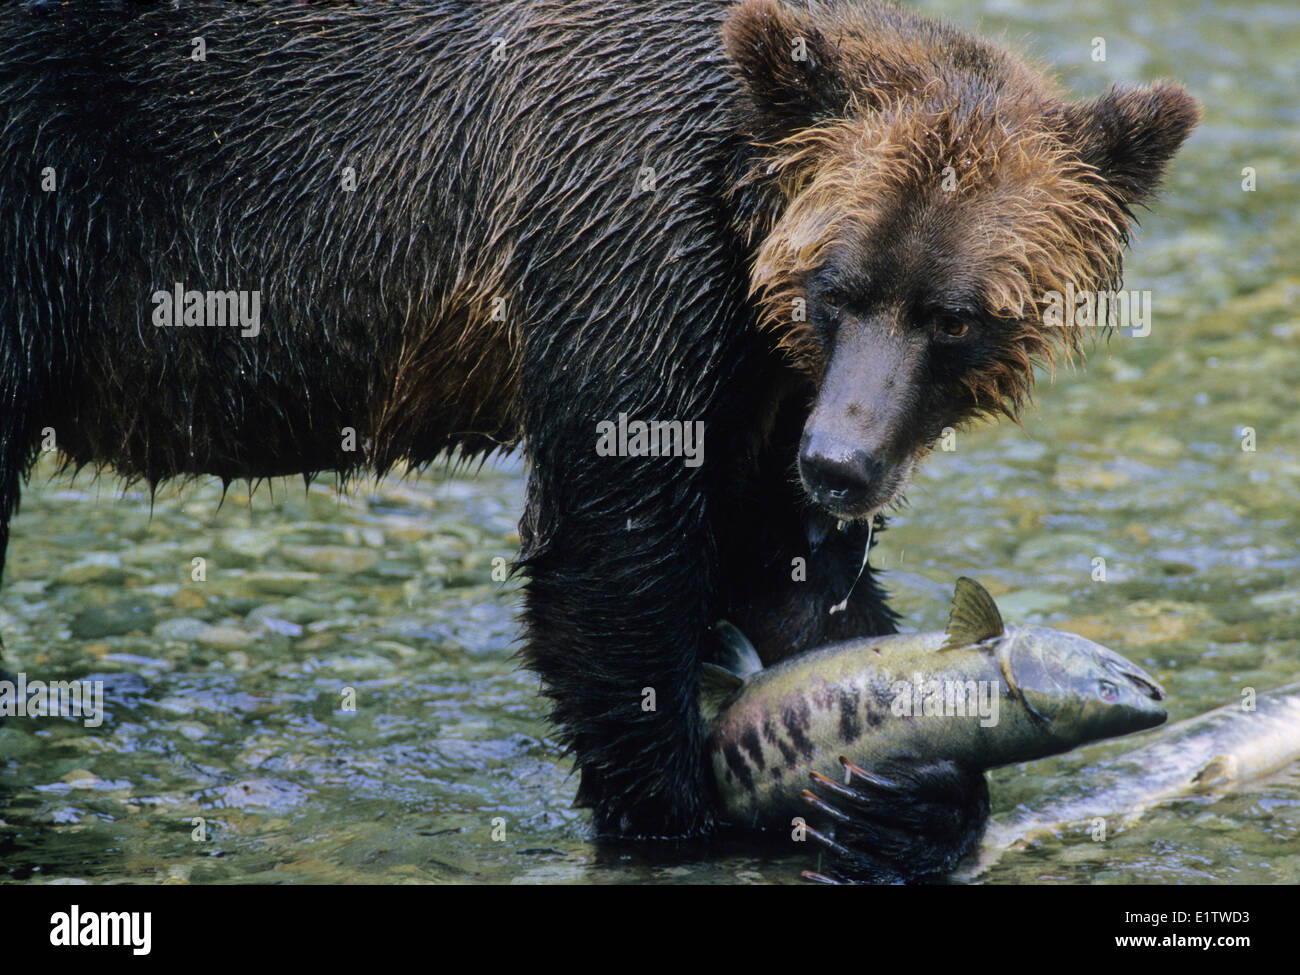 Grizzly Bear (Ursus arctos horribilis) Adult catching Chum Salmon (Oncorhynchus keta). Due to protein-enriched diet salmon Stock Photo